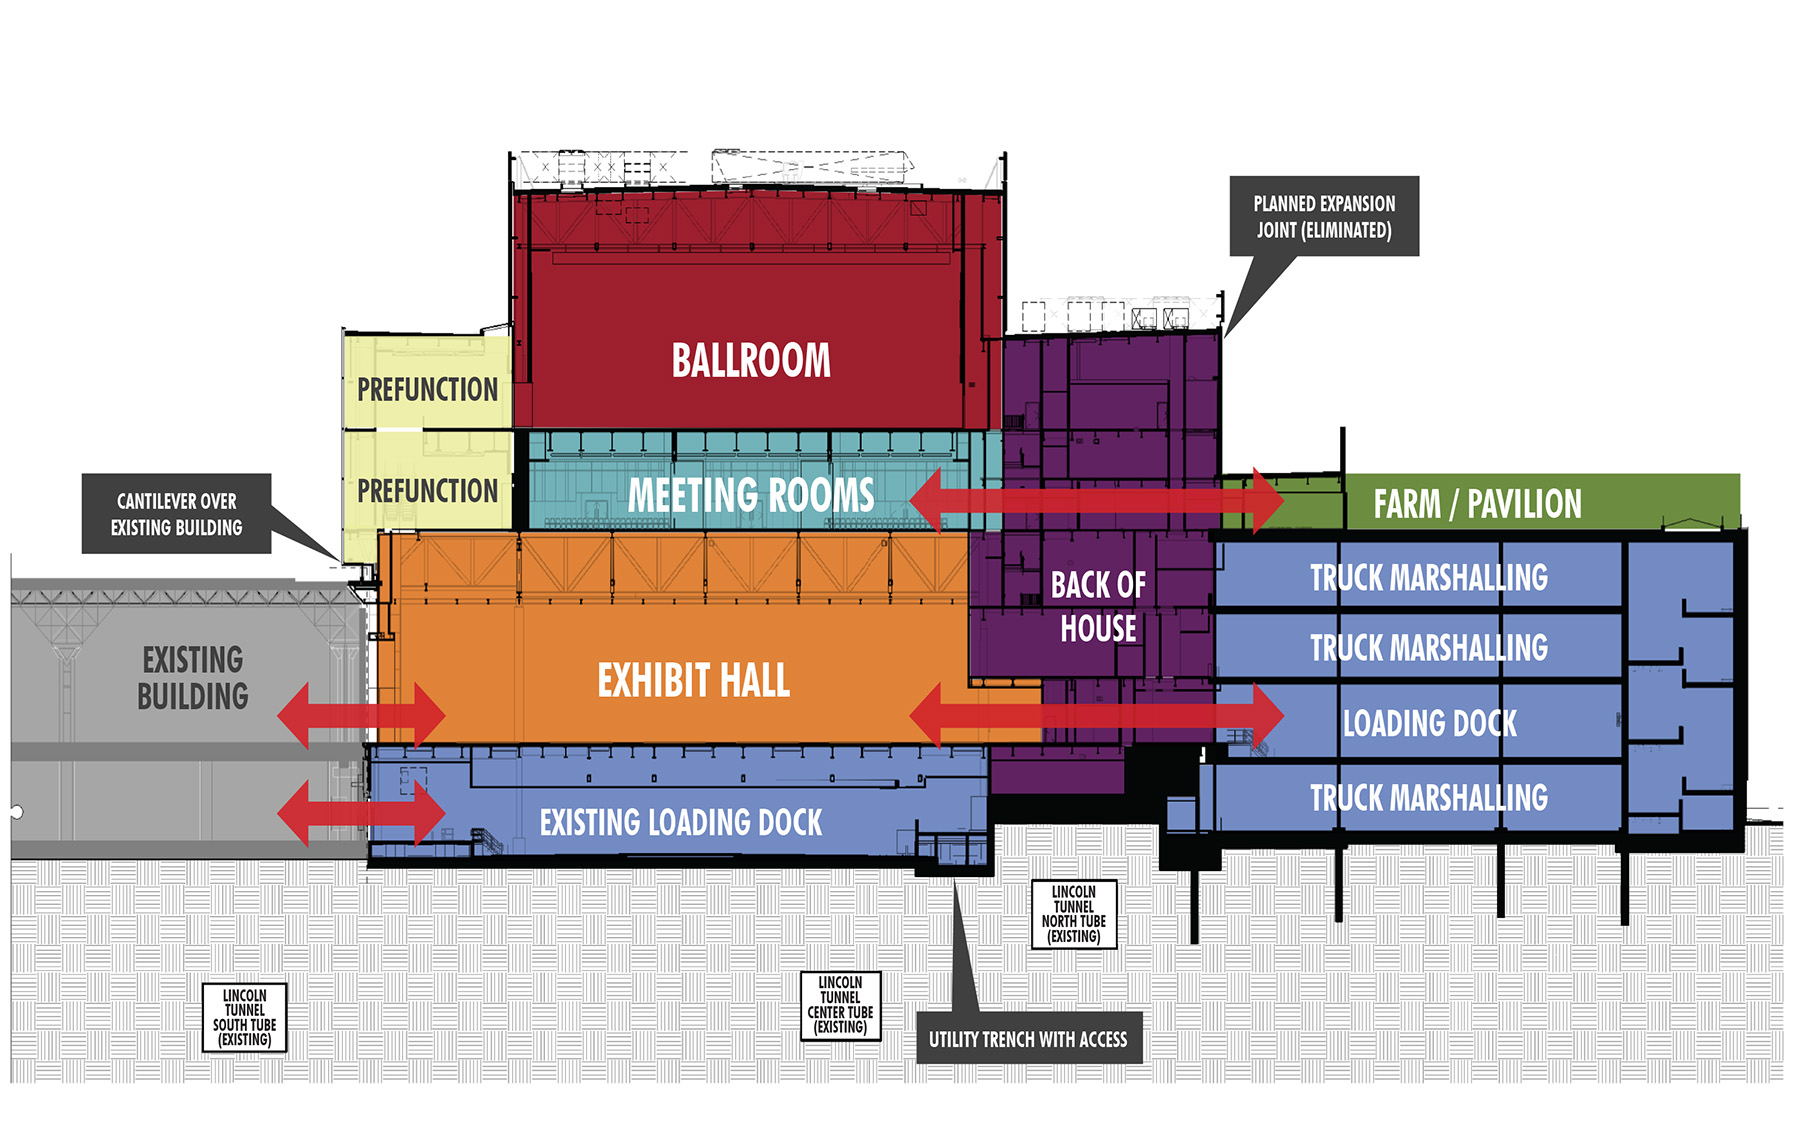 Image shows the various spaces built in the expanded convention center including the ballroom, meeting rooms, exhibit hall, and prefunction spaces